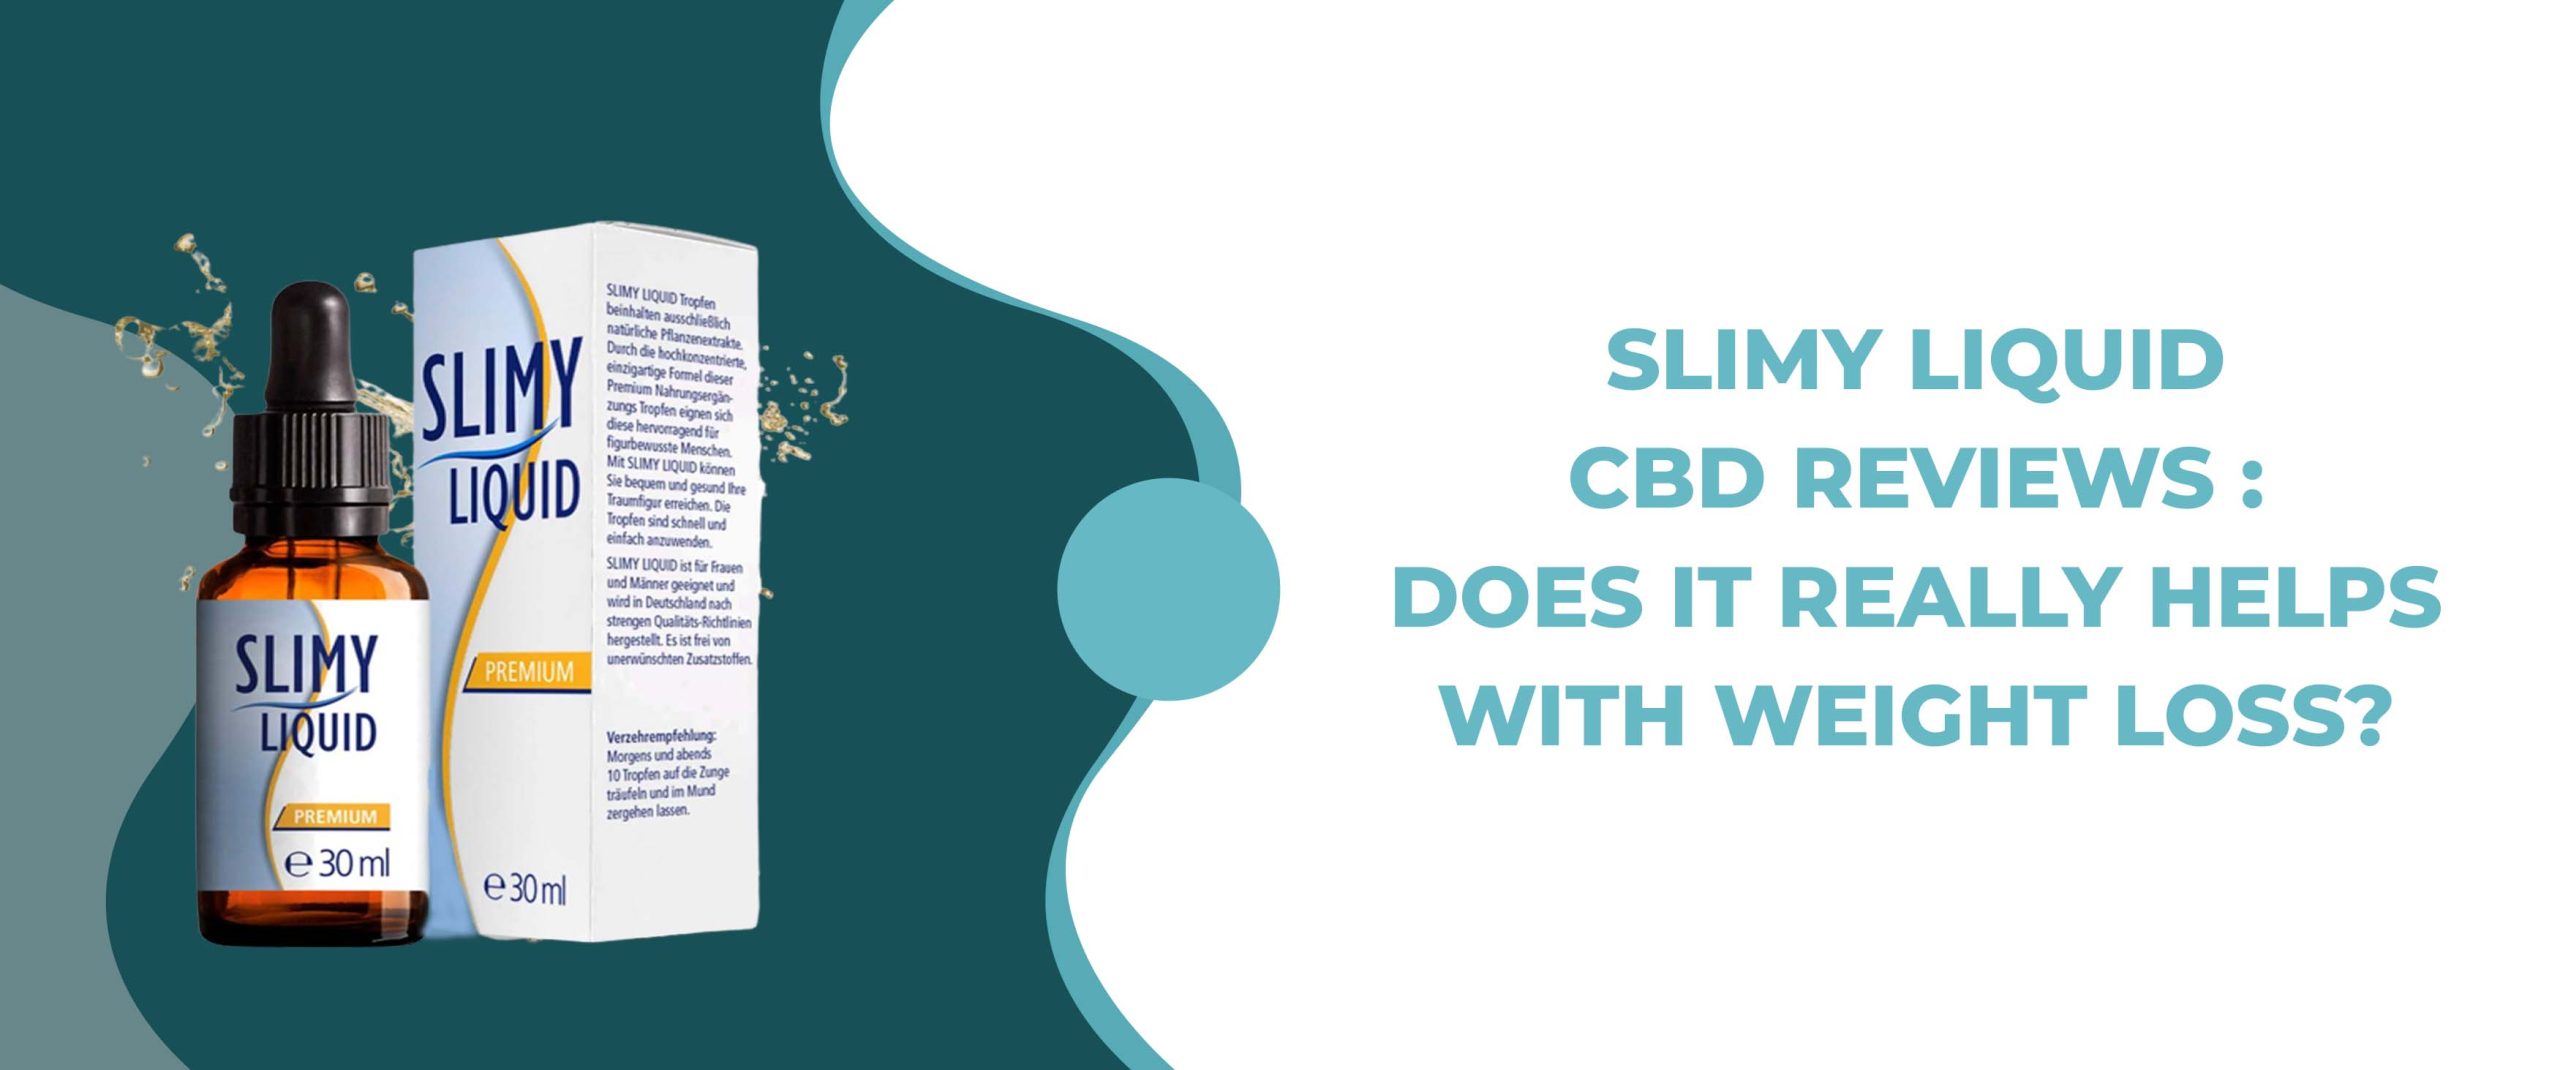 Slimy Liquid CBD Reviews – Does It Really Helps With Weight Loss?